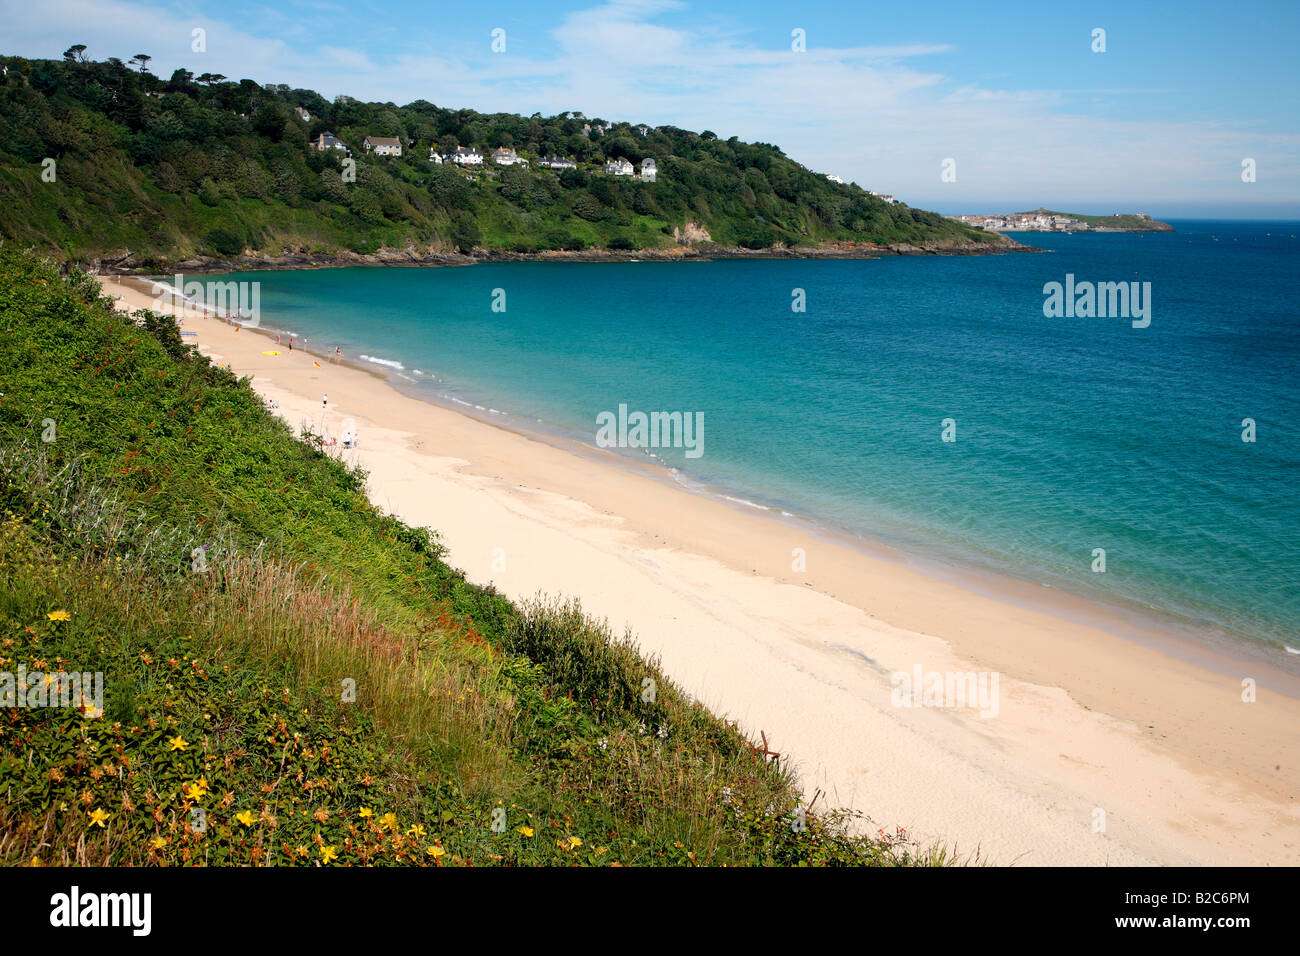 The beach at Carbis Bay in Cornwall UK with St. Ives in the distance. Stock Photo